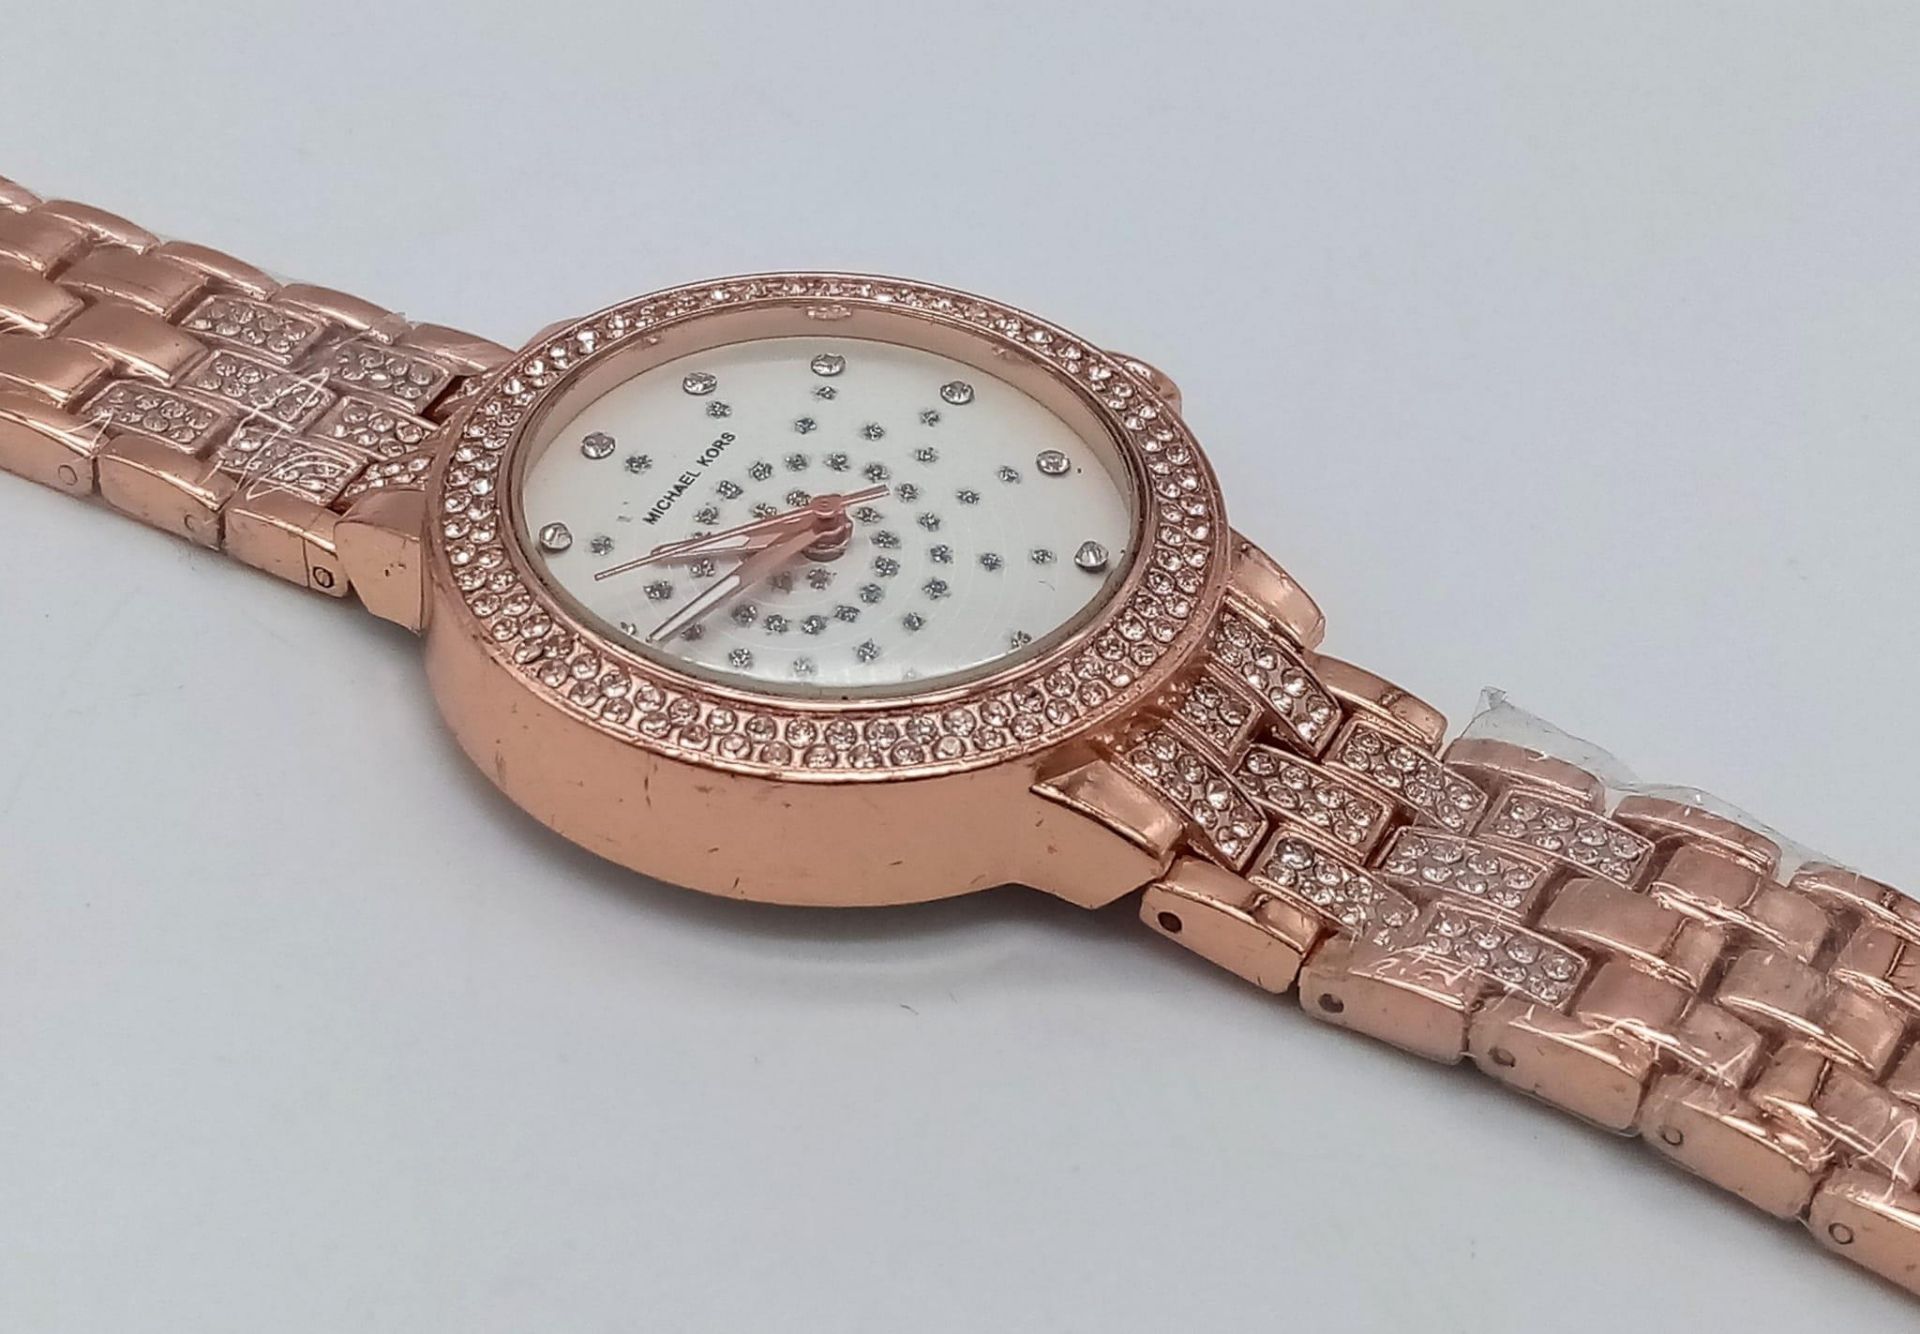 A LADIES MICHAEL KORS FACSIMILE WATCH IN ROSE GOLD TONE STONE SET BEZEL AND STRAP, FULL WORKING - Image 3 of 4